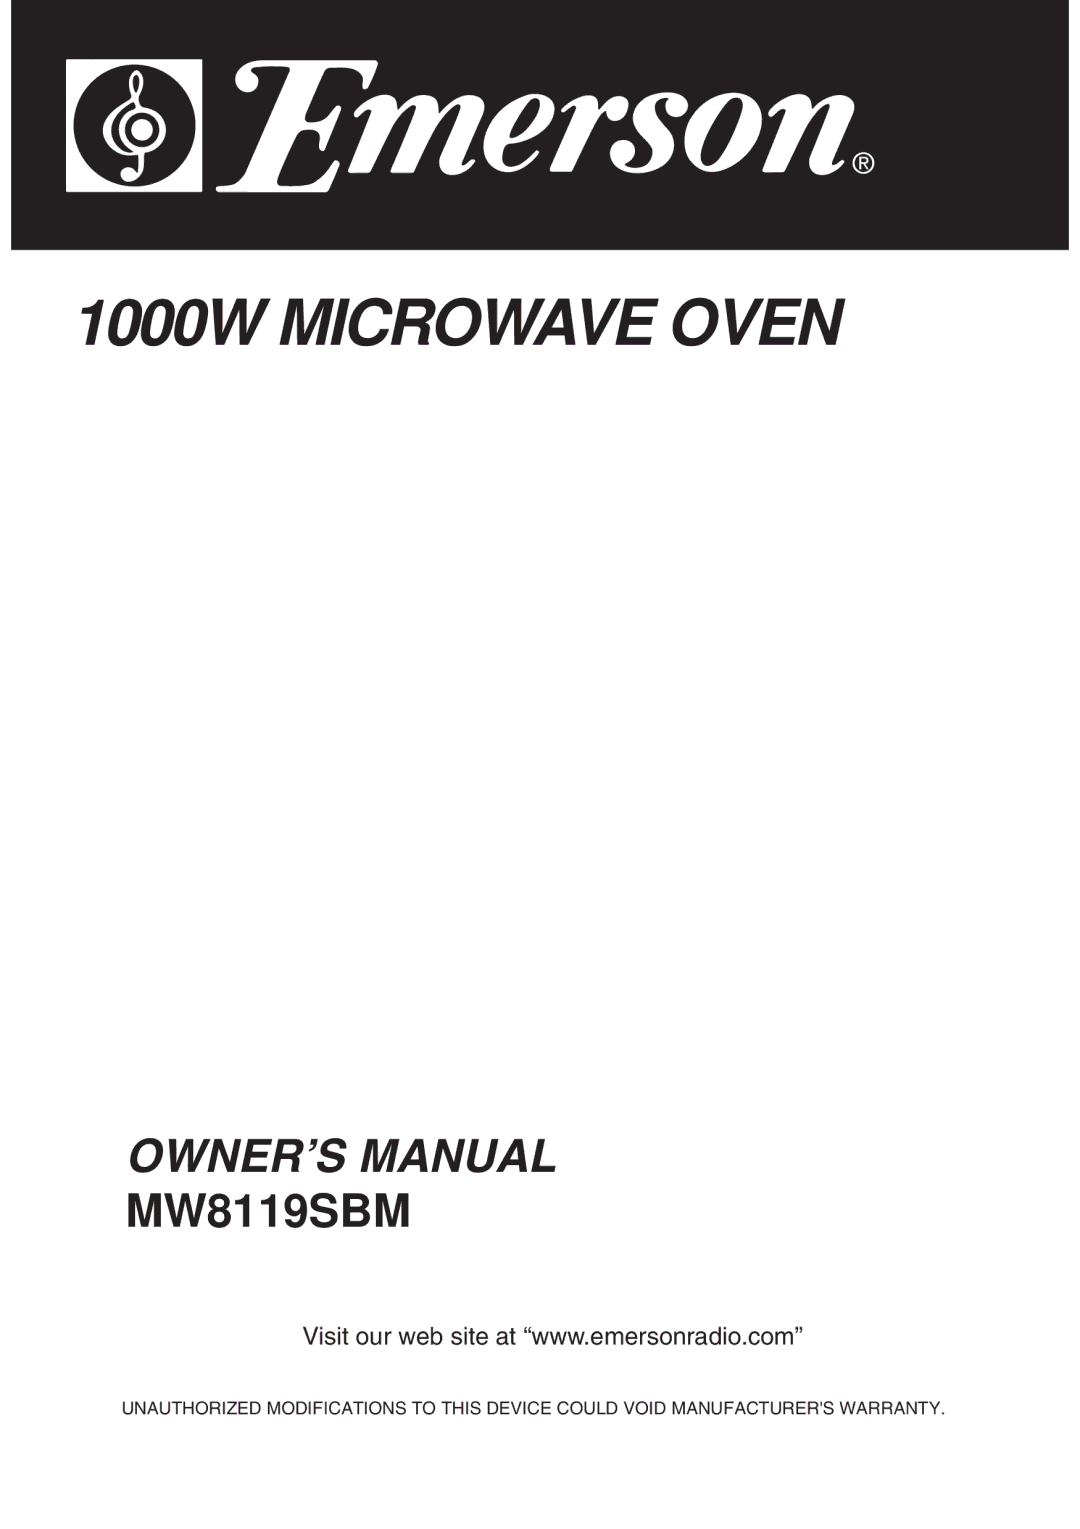 Emerson MW8119SBM owner manual 1000W Microwave Oven 